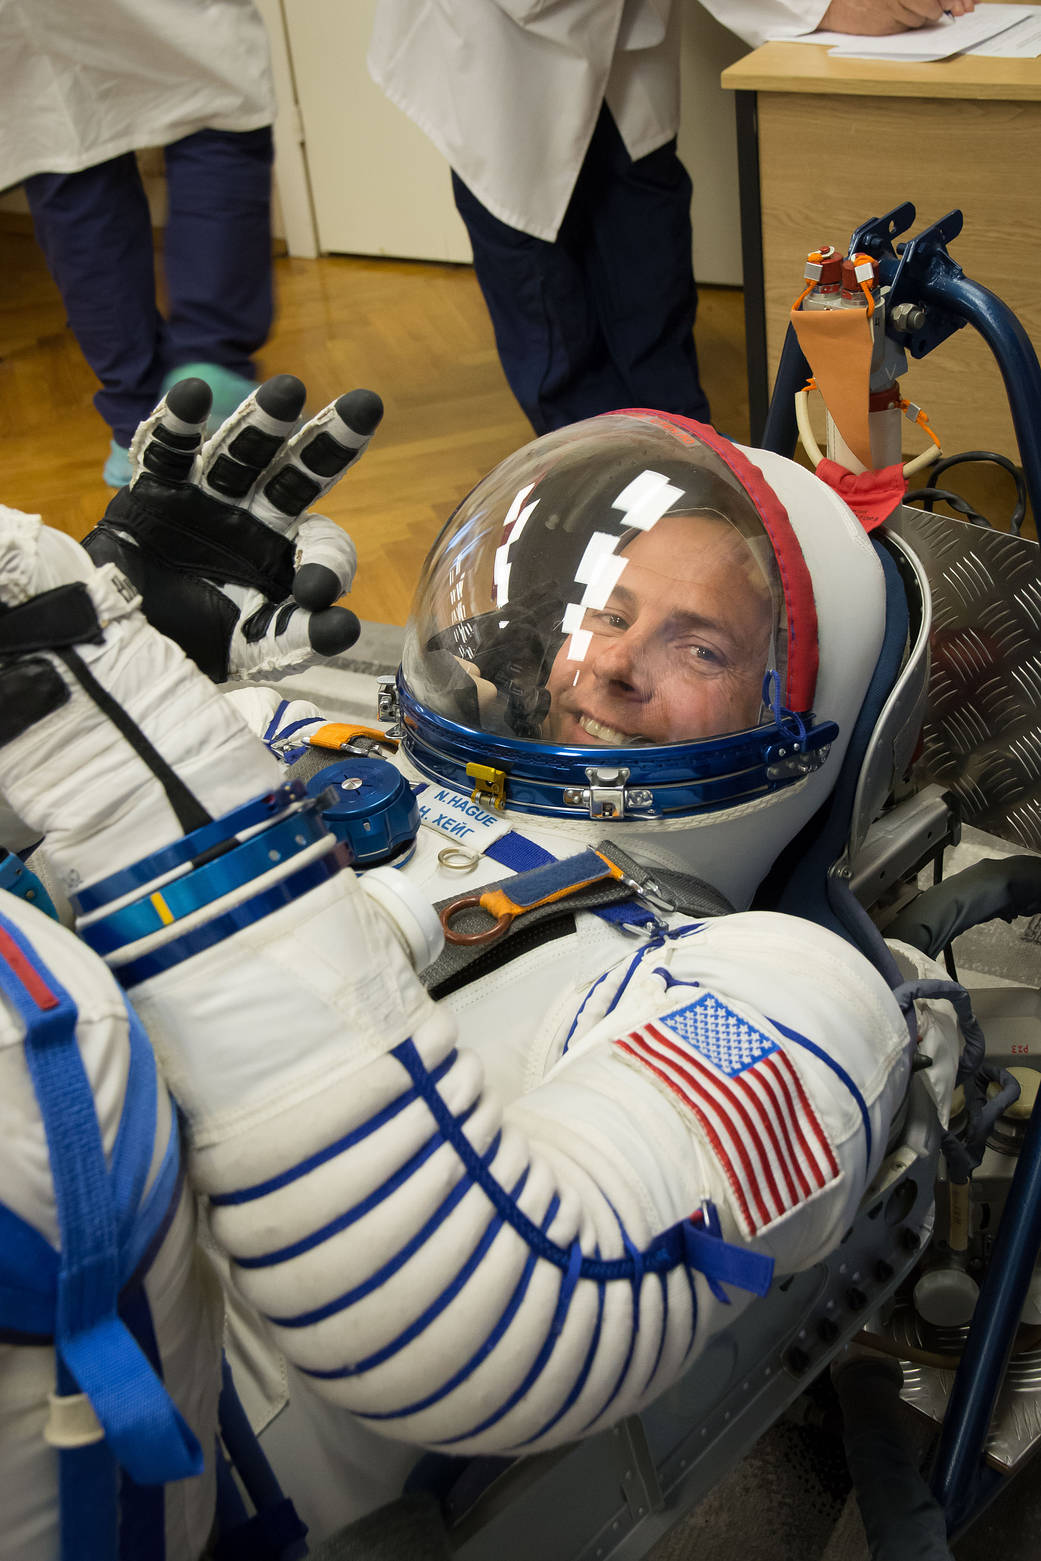 Expedition 57 crew member Nick Hague in his Russian Sokol launch and entry suit